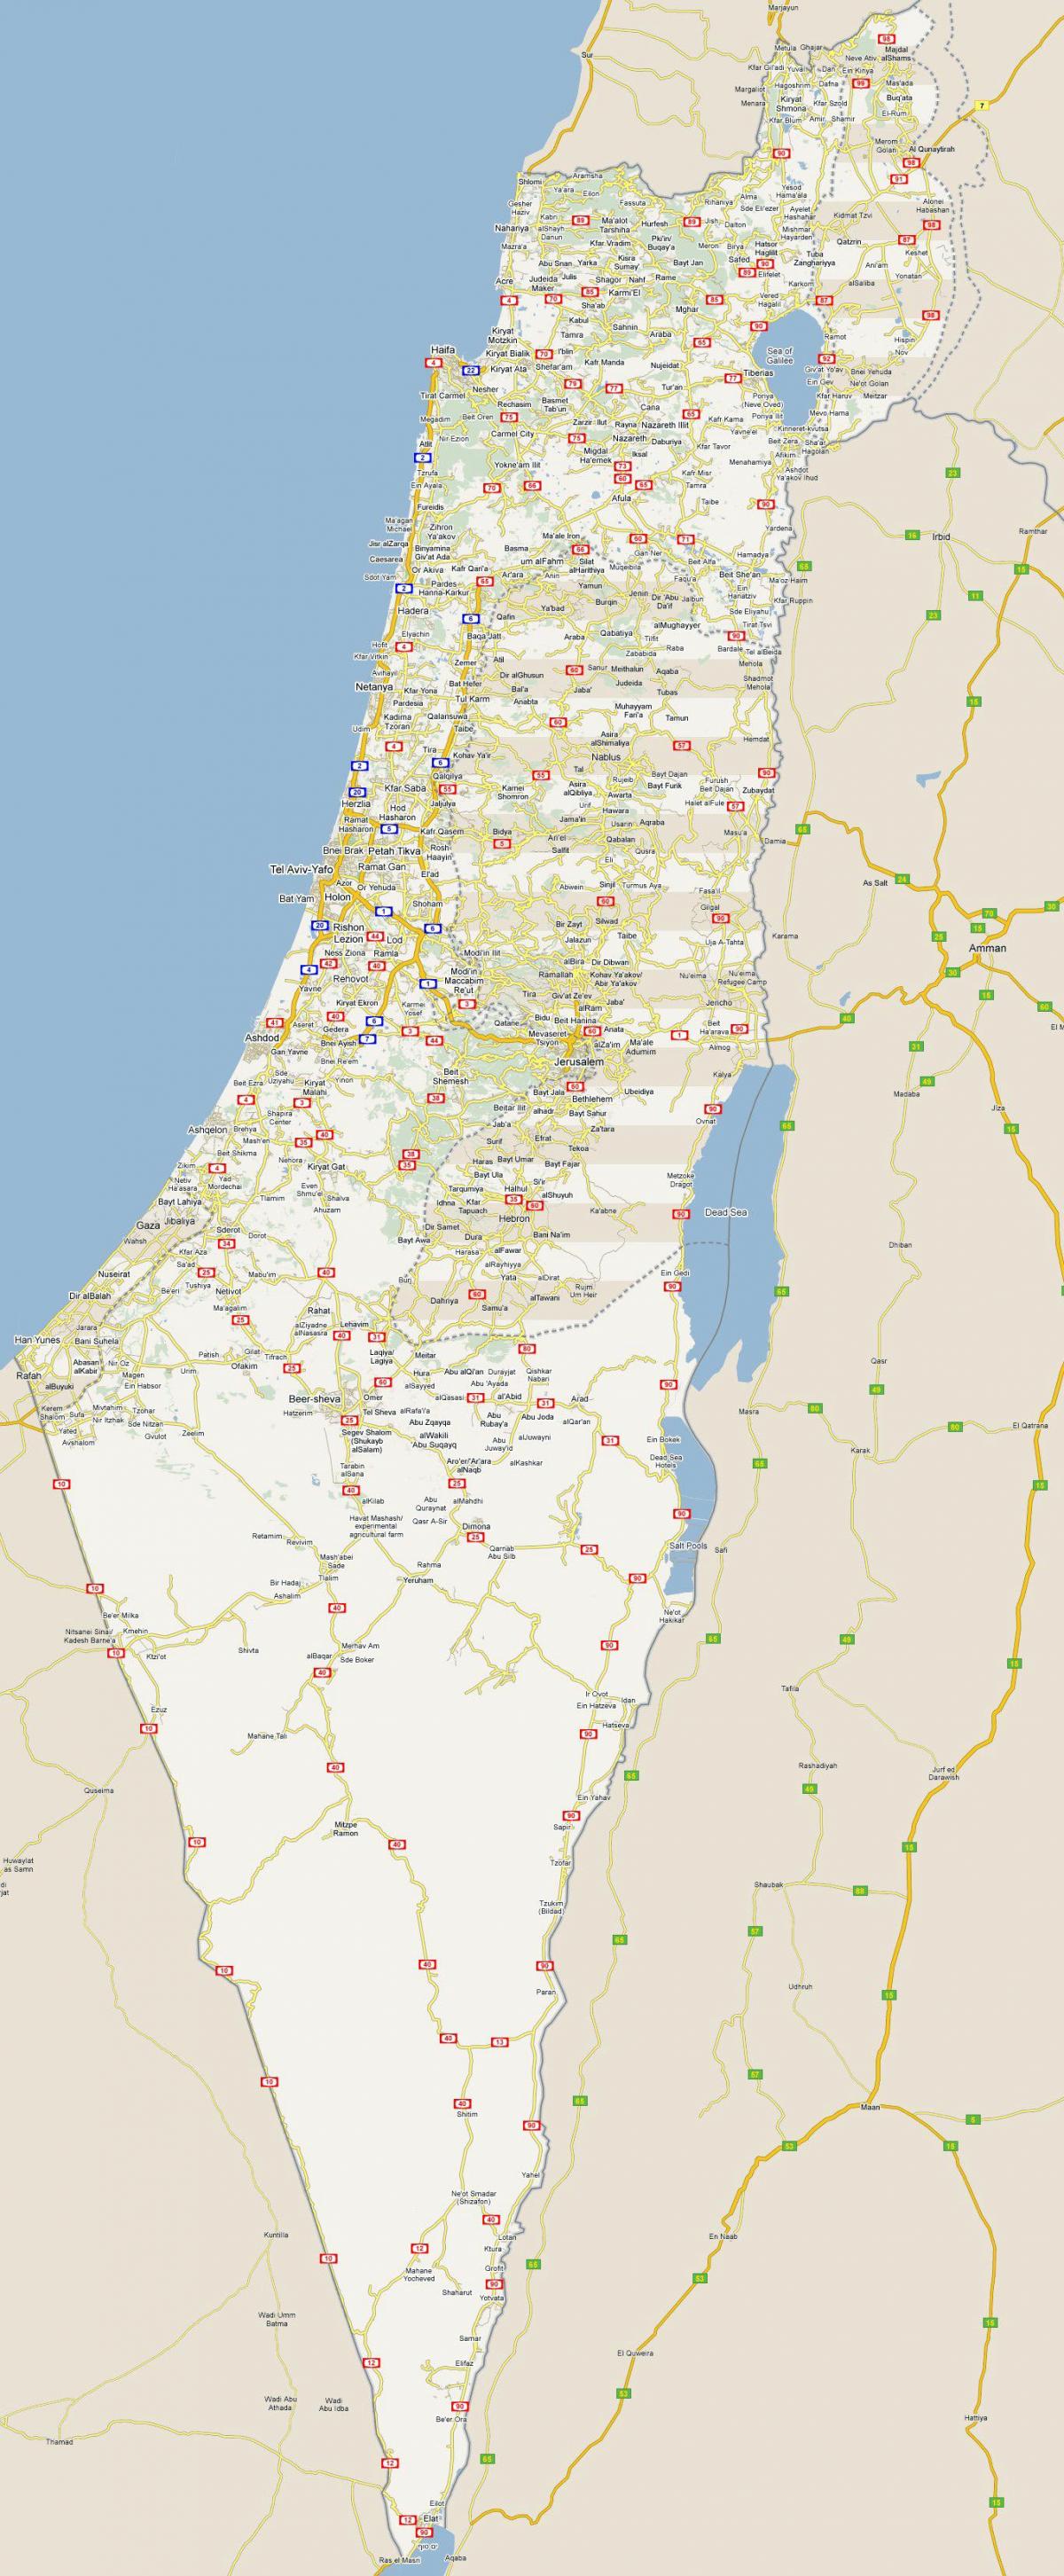 Driving map of Israel